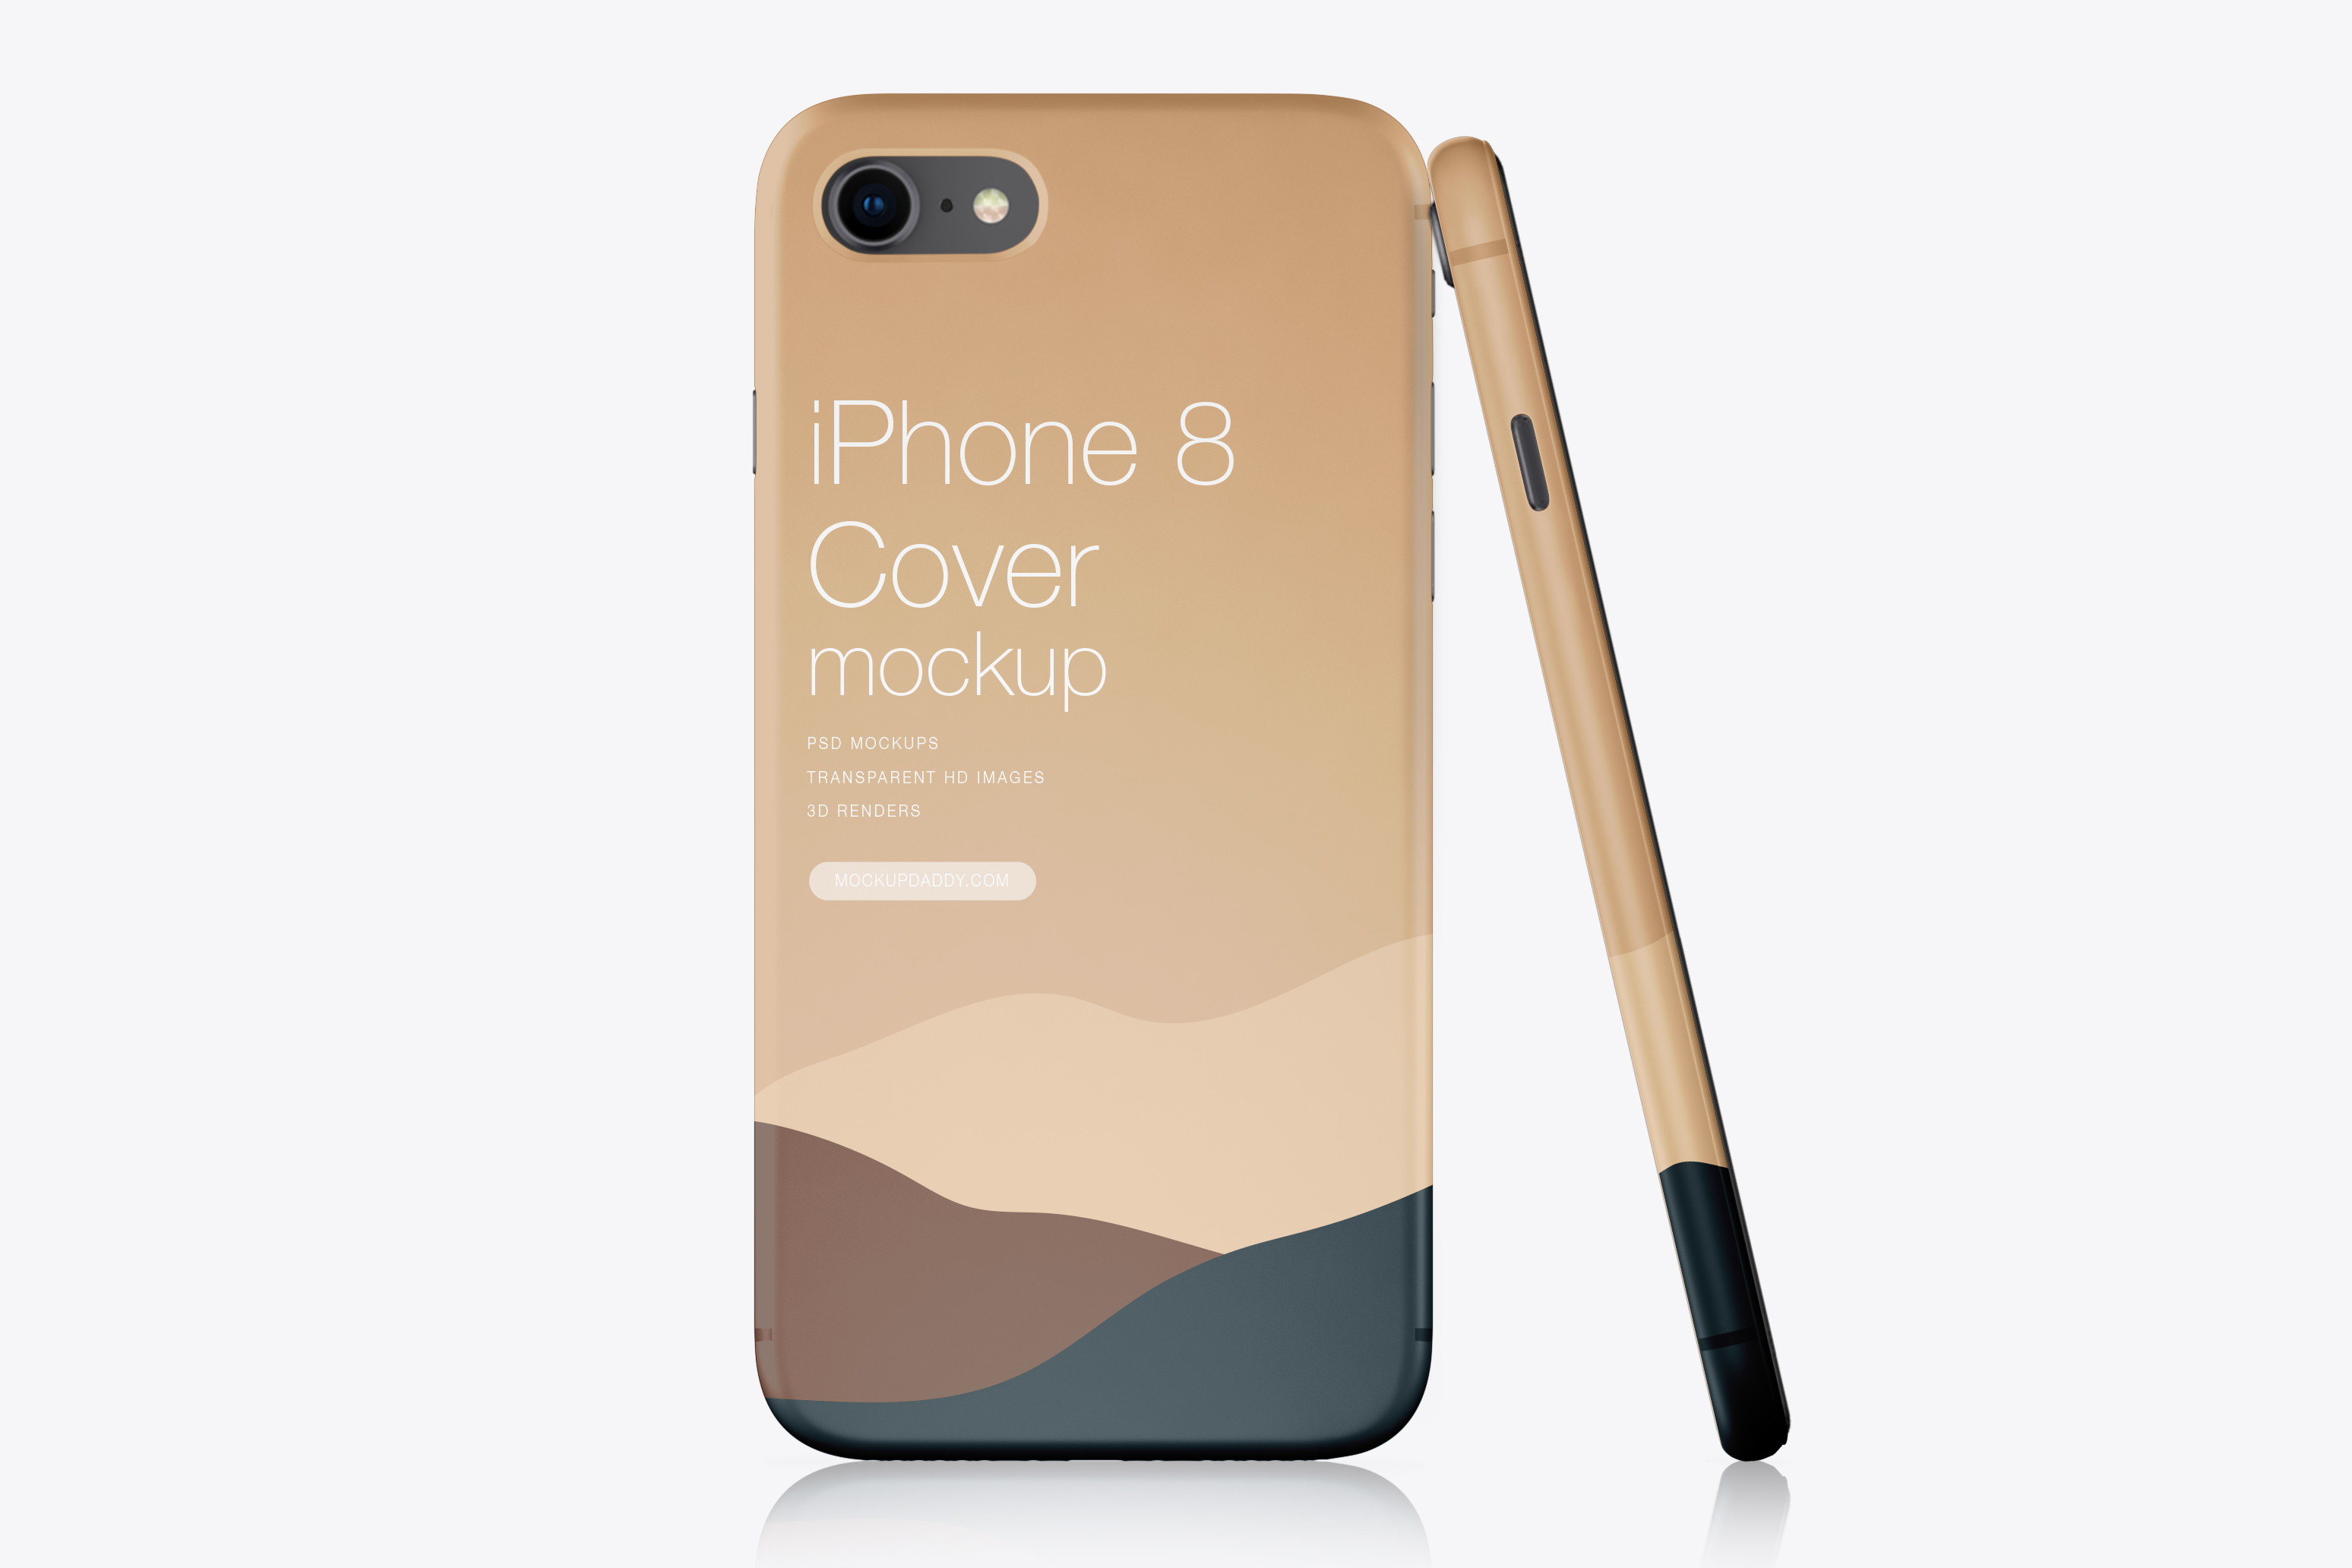 Download Mobile Cover Mockup Psd Free Download - Free Vector ...